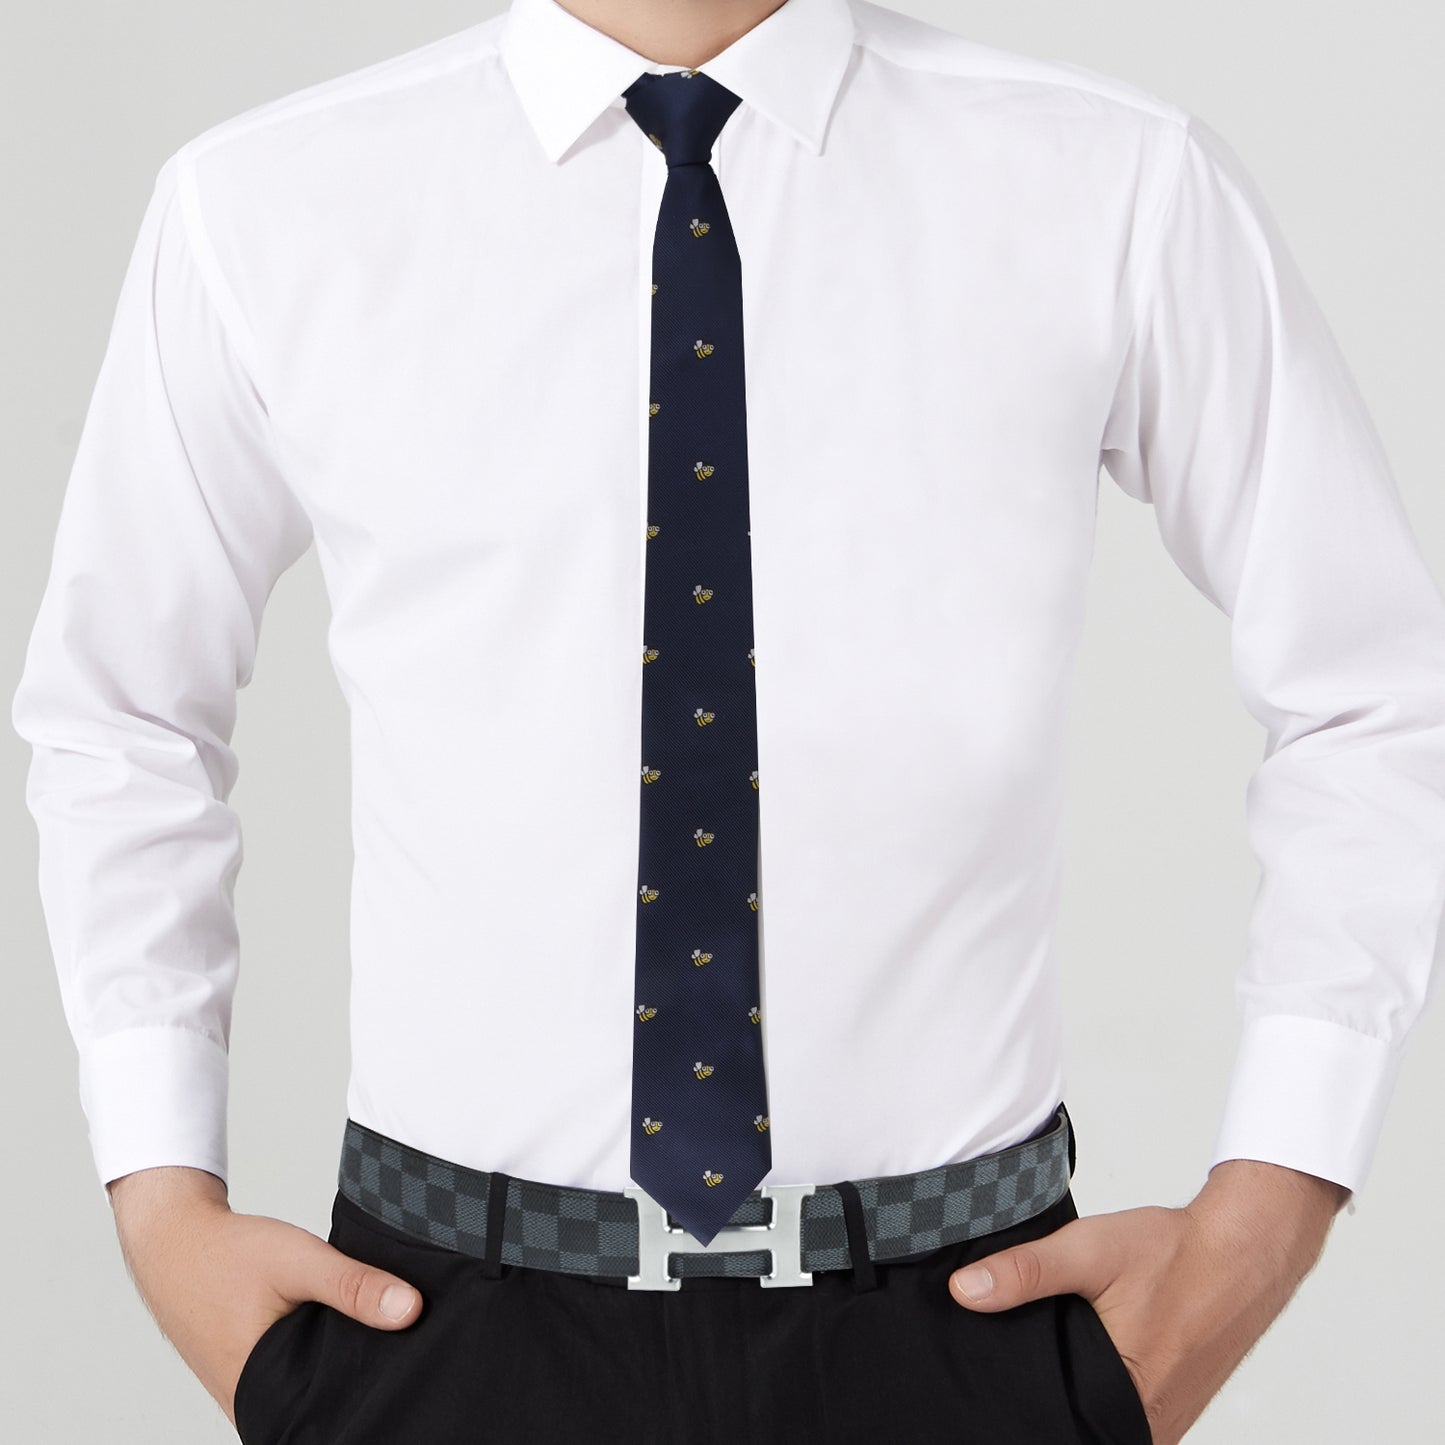 A stylish man wearing the Bee Skinny Tie and white shirt.